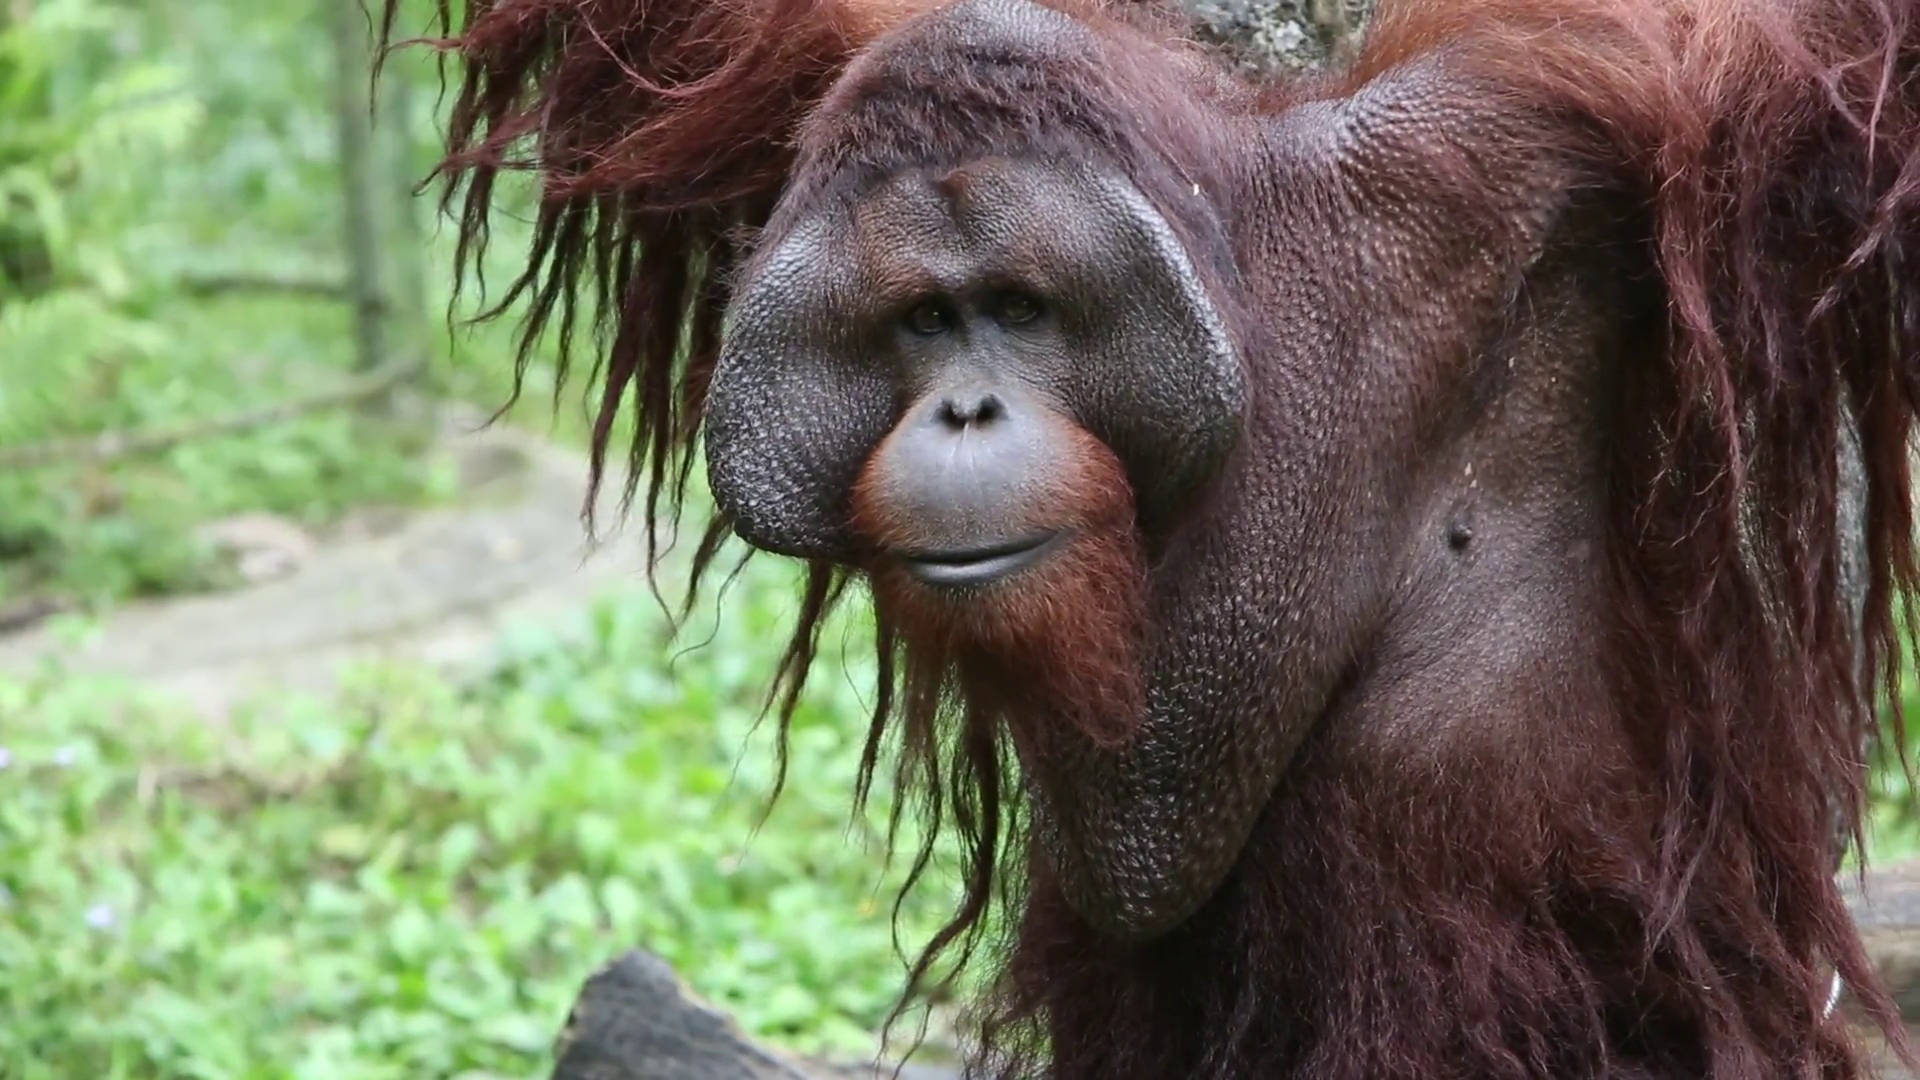 An adult Bornean orangutan sit down and do expression happy in the ...